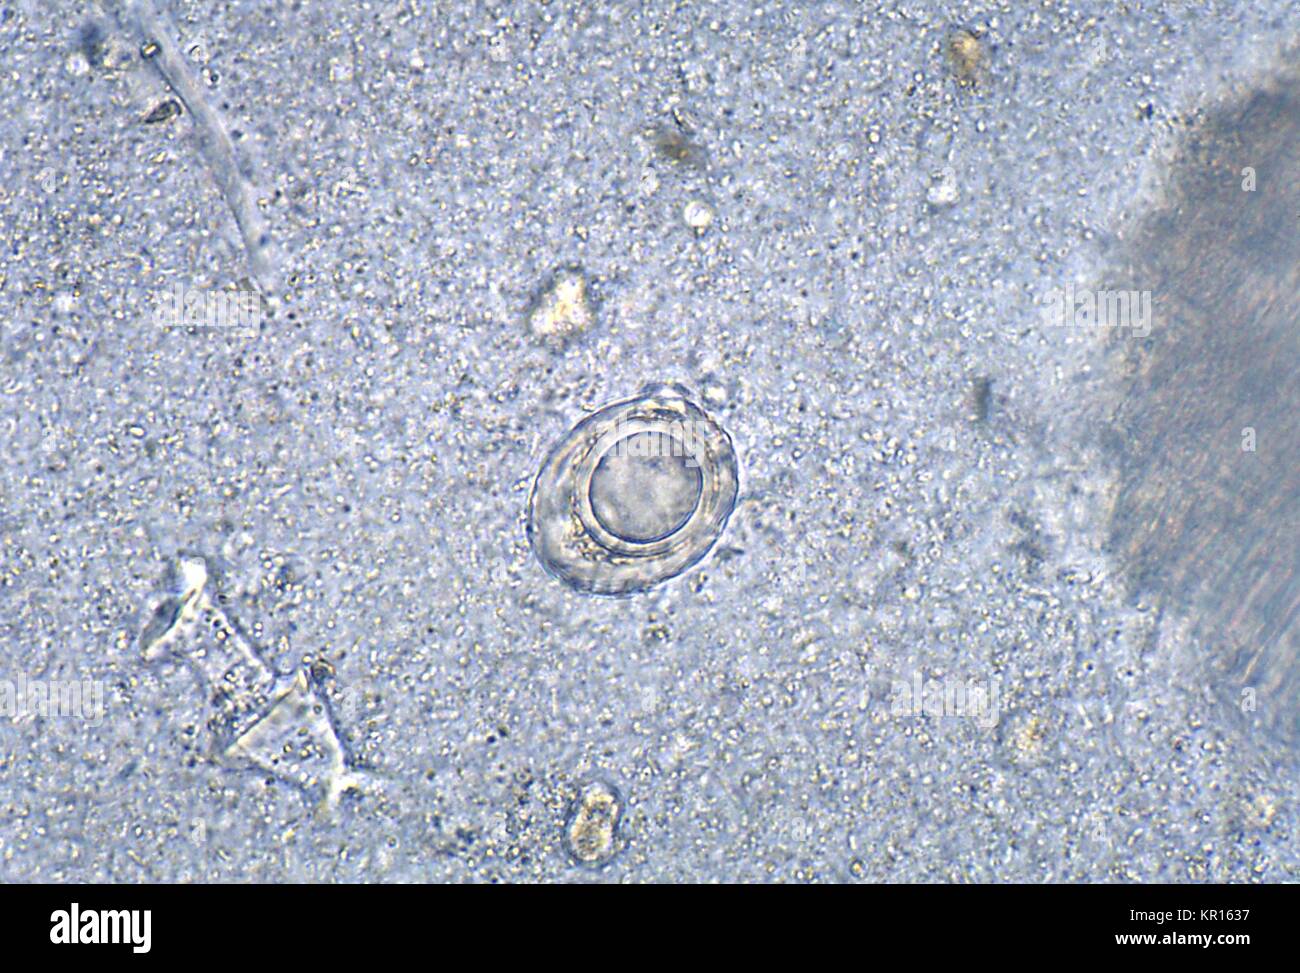 A photomicrograph of a Trichuris vulpis egg that has been removed from a dog?s intestine, 1978. T. vulpis, or 'Canine Whipworm', is a parasite that attaches itself to the canine large intestinal mucosa by embedding its head, thereby, causing intestinal inflammation. Image courtesy CDC/Dr. Mae Melvin. Stock Photo